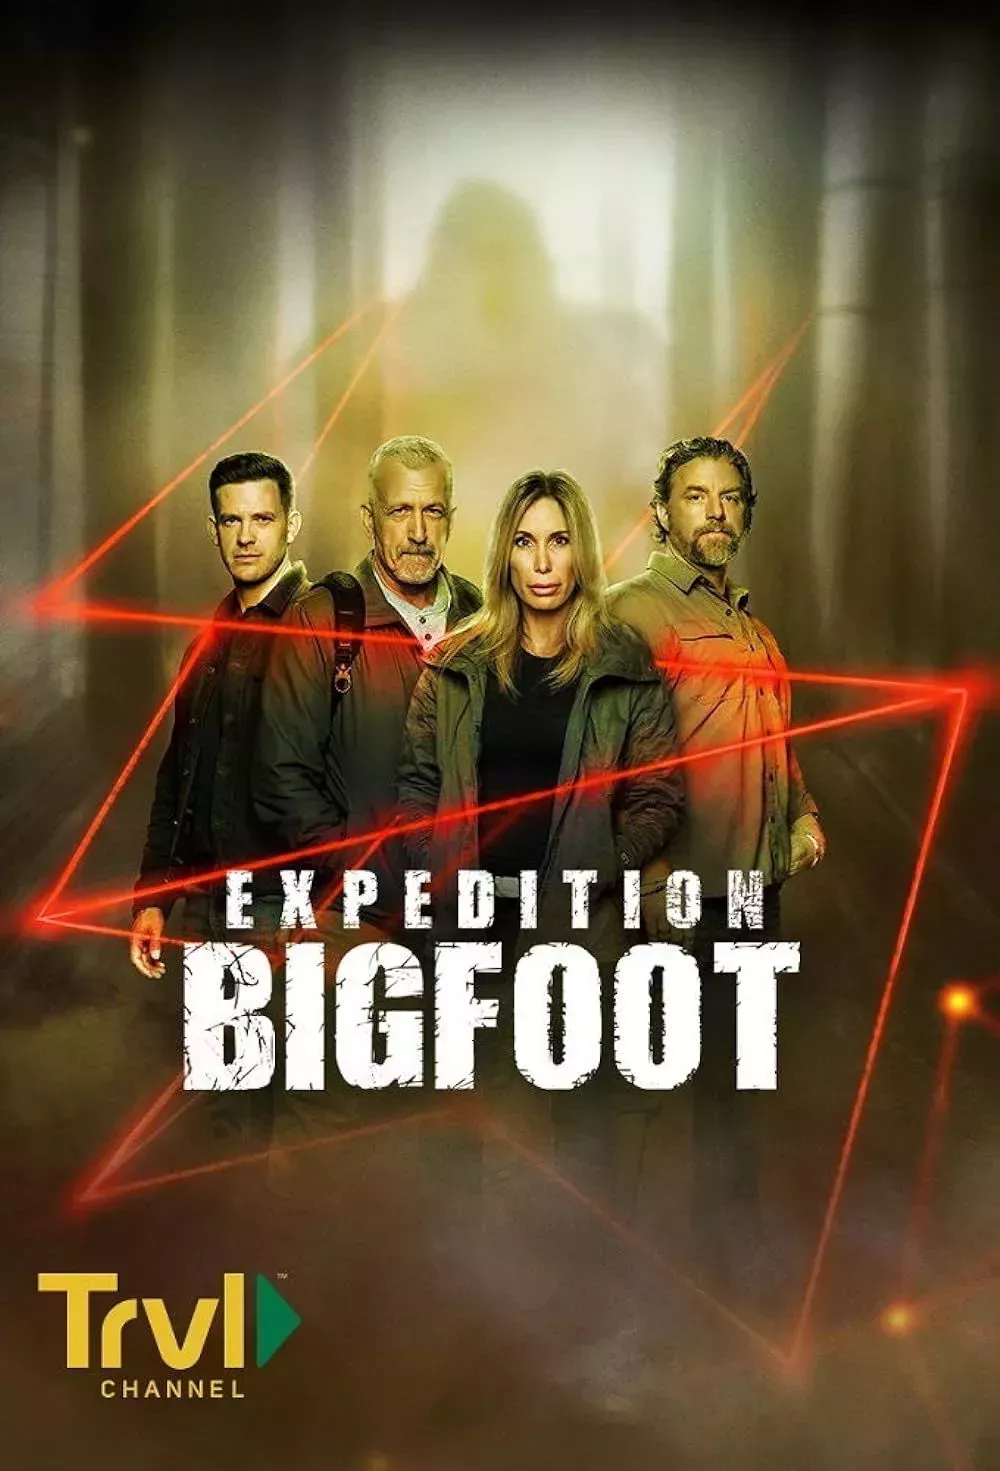 Promotional images for Expendition Bigfoot